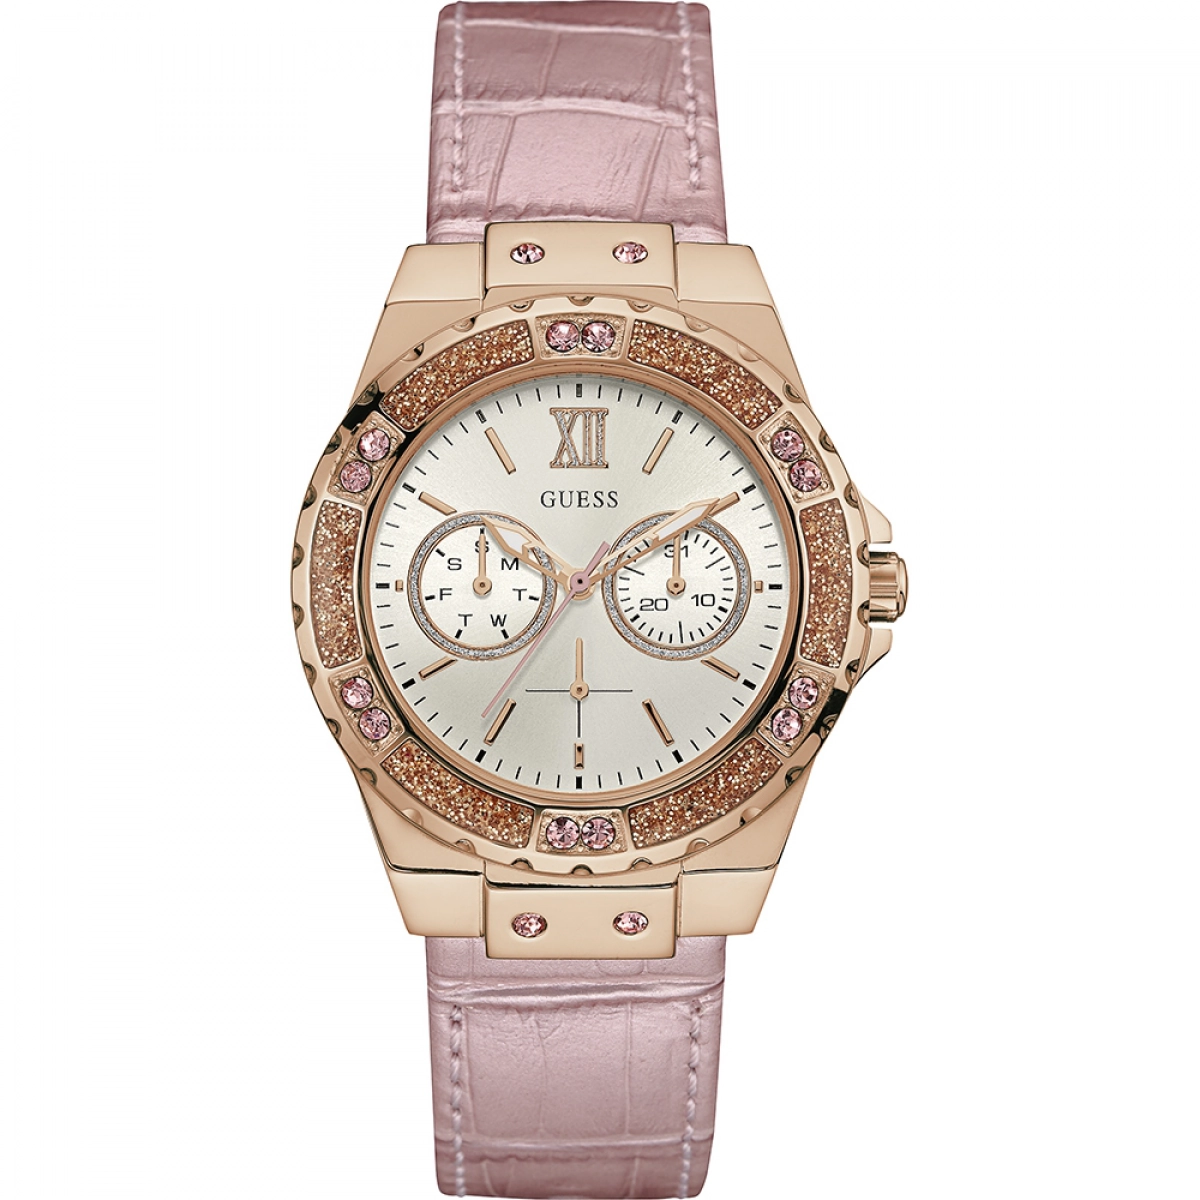 W0775L3 GUESS WATCH WOMAN WITH PEDRERY BEZEL